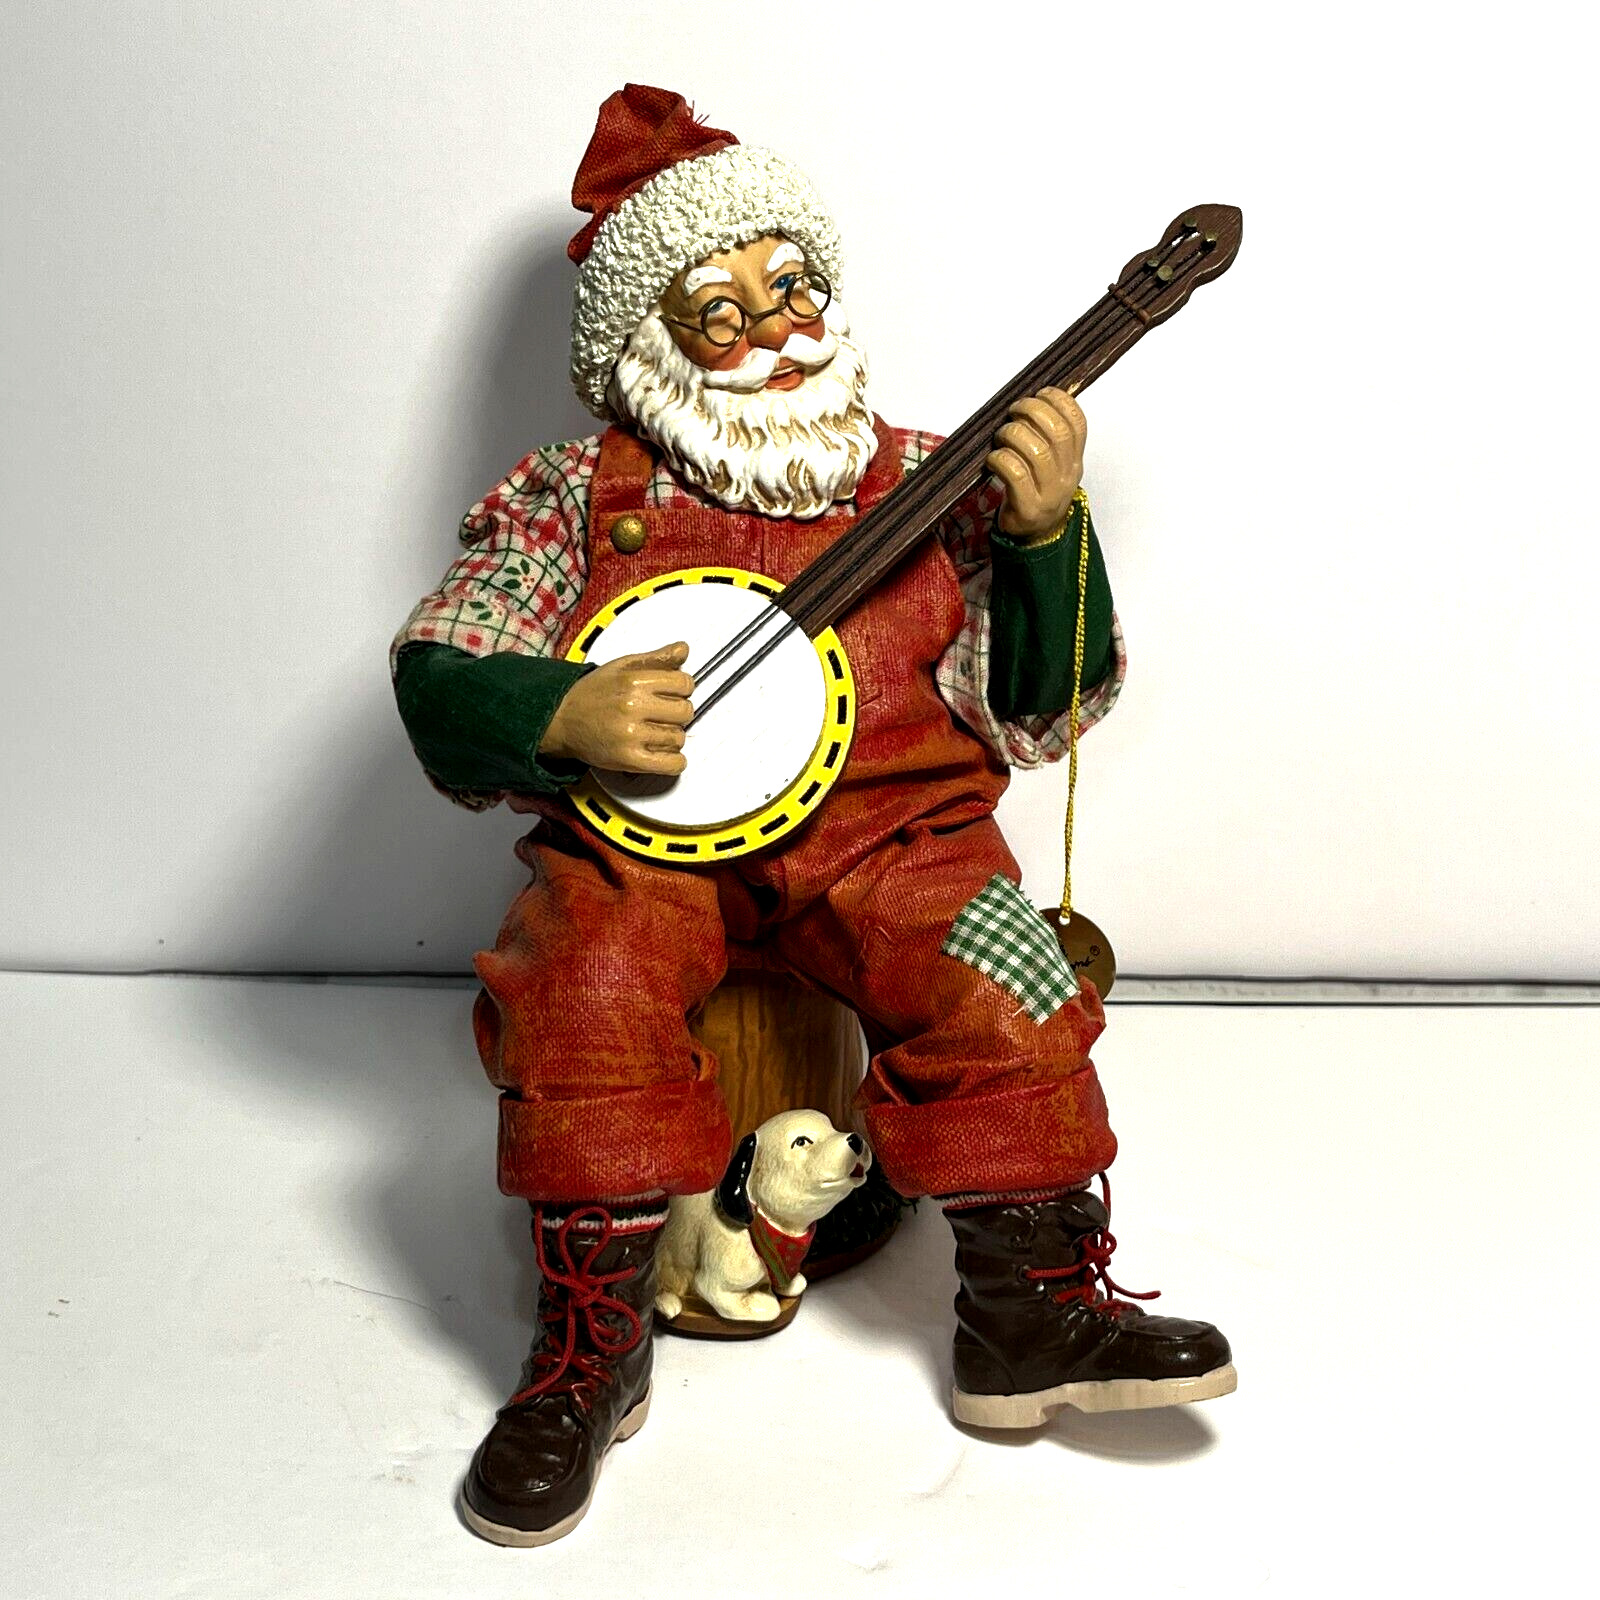 Possible Dreams Clothique Country Sounds Santa Playing Banjo Figurine 1995